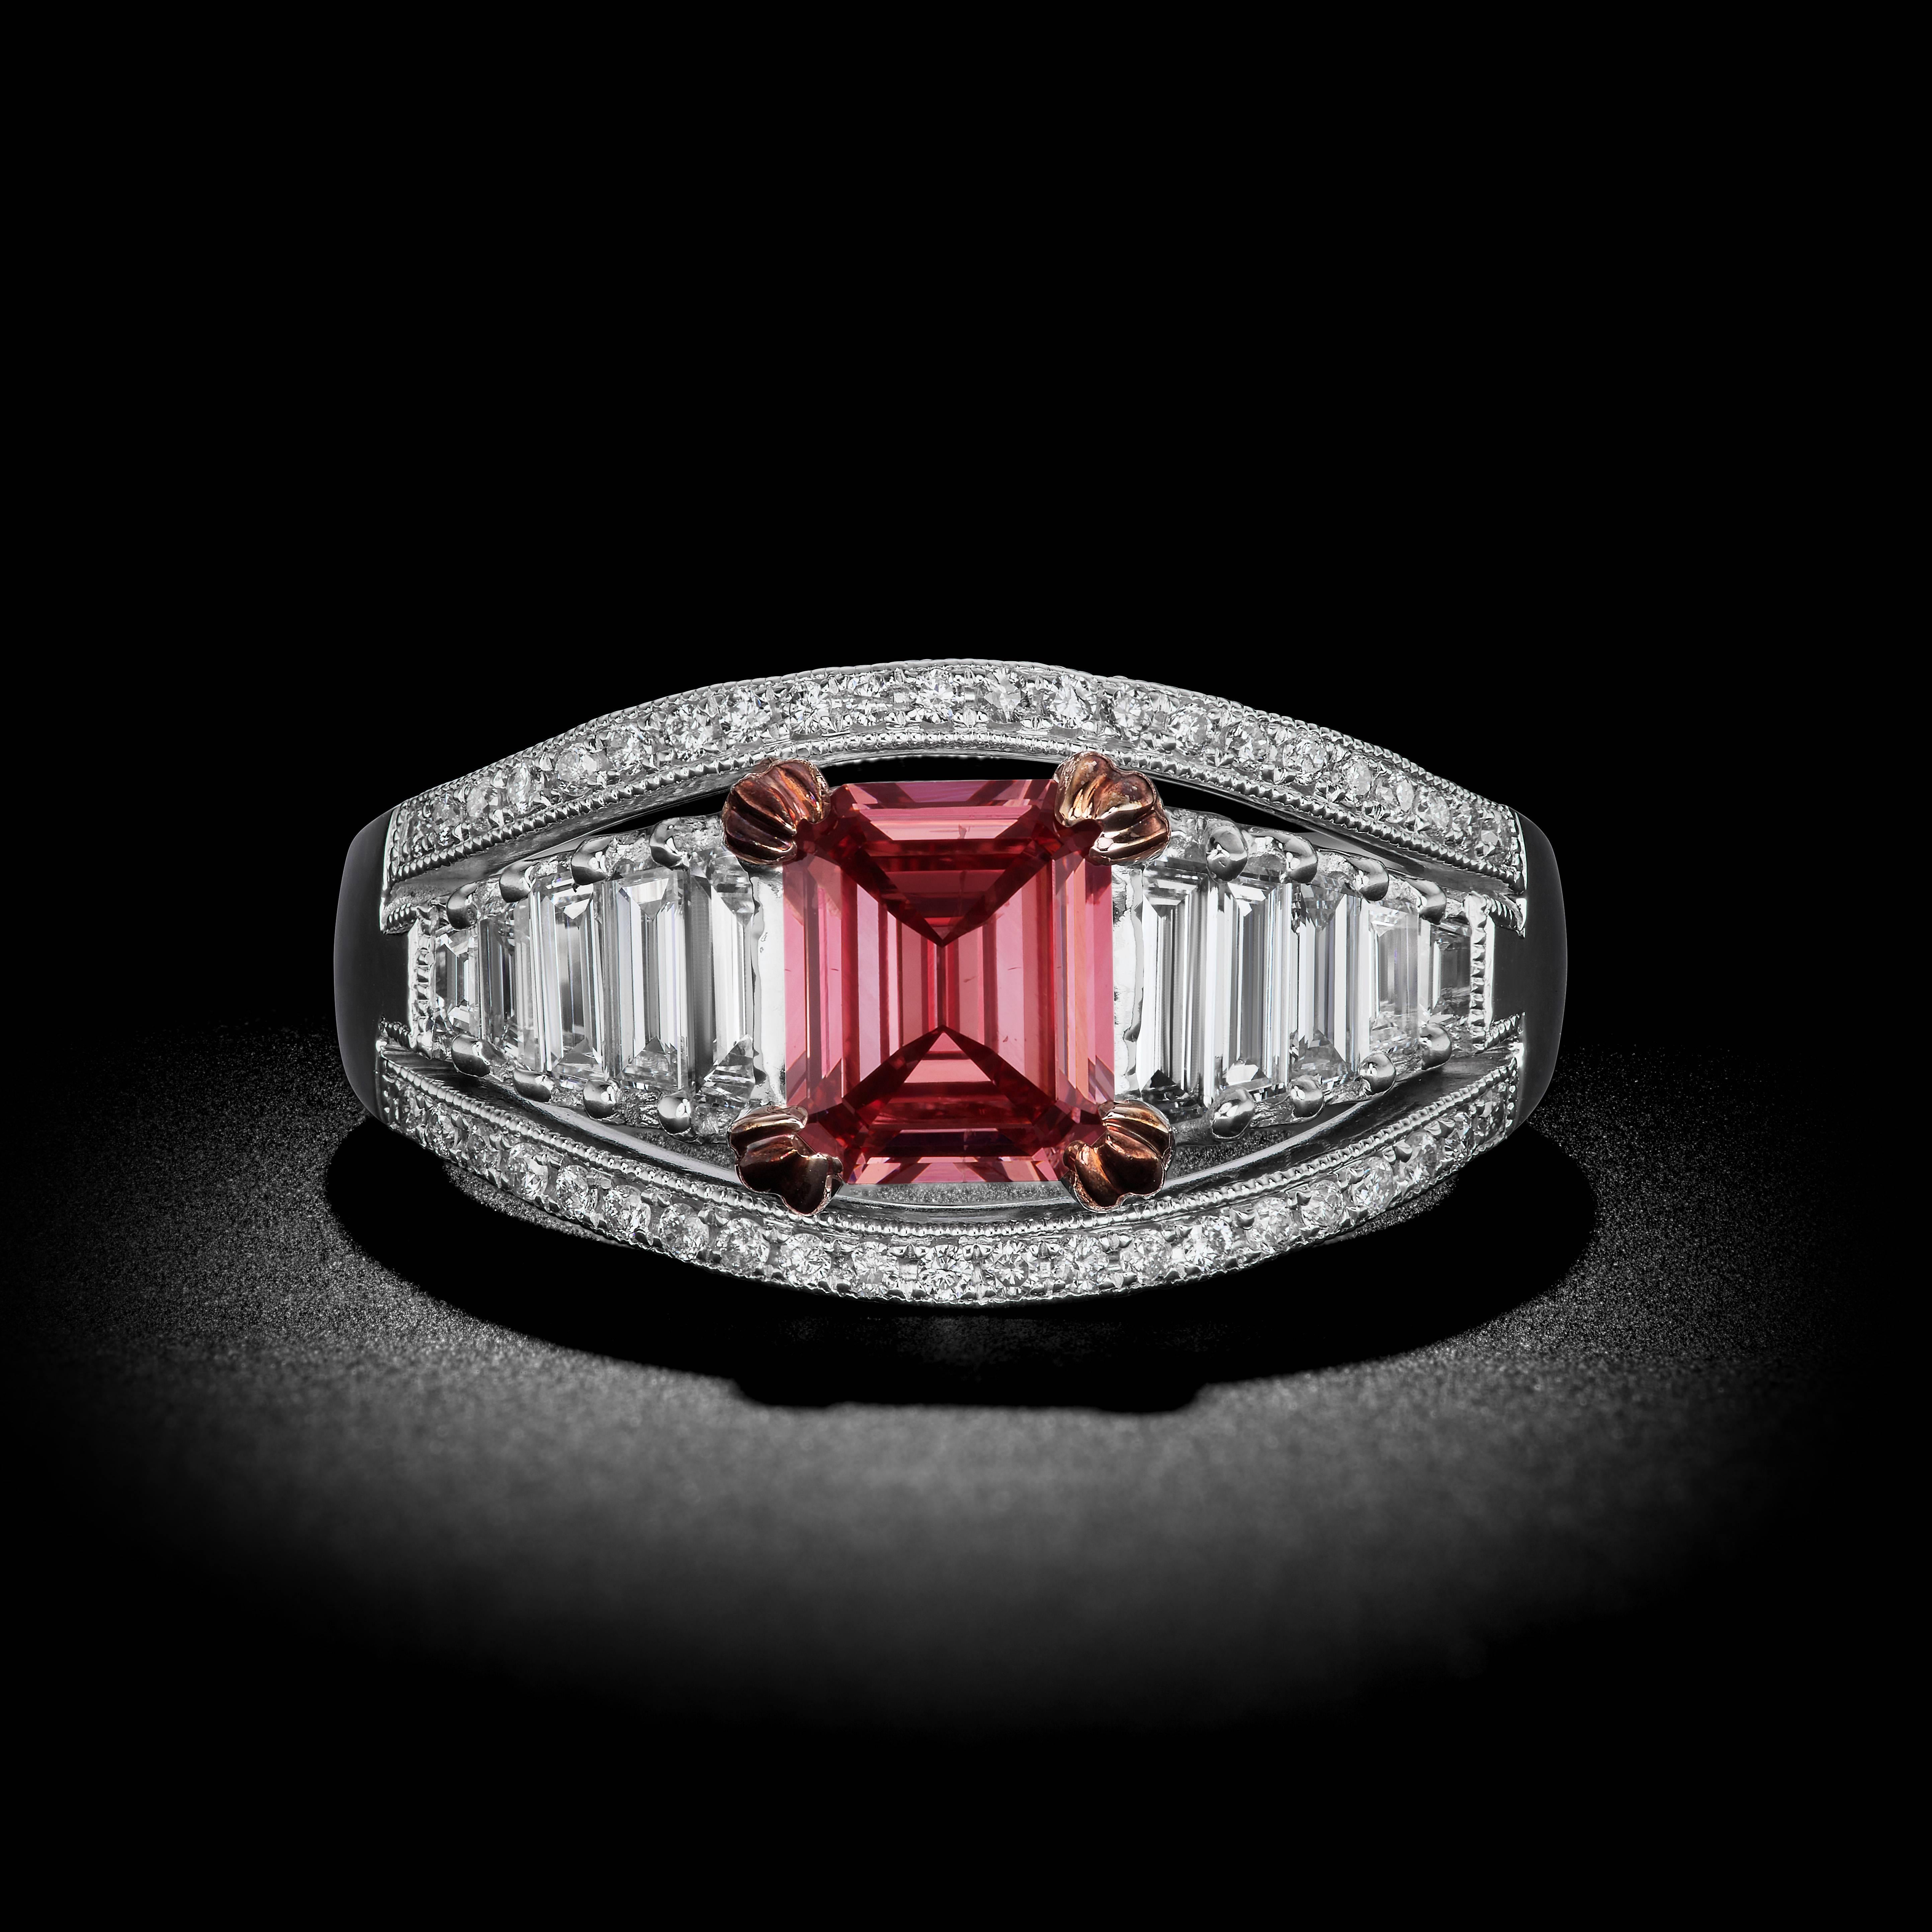 A breath-taking Emerald-cut Diamond ring is featured in this exquisite handcrafted 18k White Gold mounting. The center stone consists of a 1.10 carat Fancy Deep Pink Color. Accompanied with a GIA Certificate.

